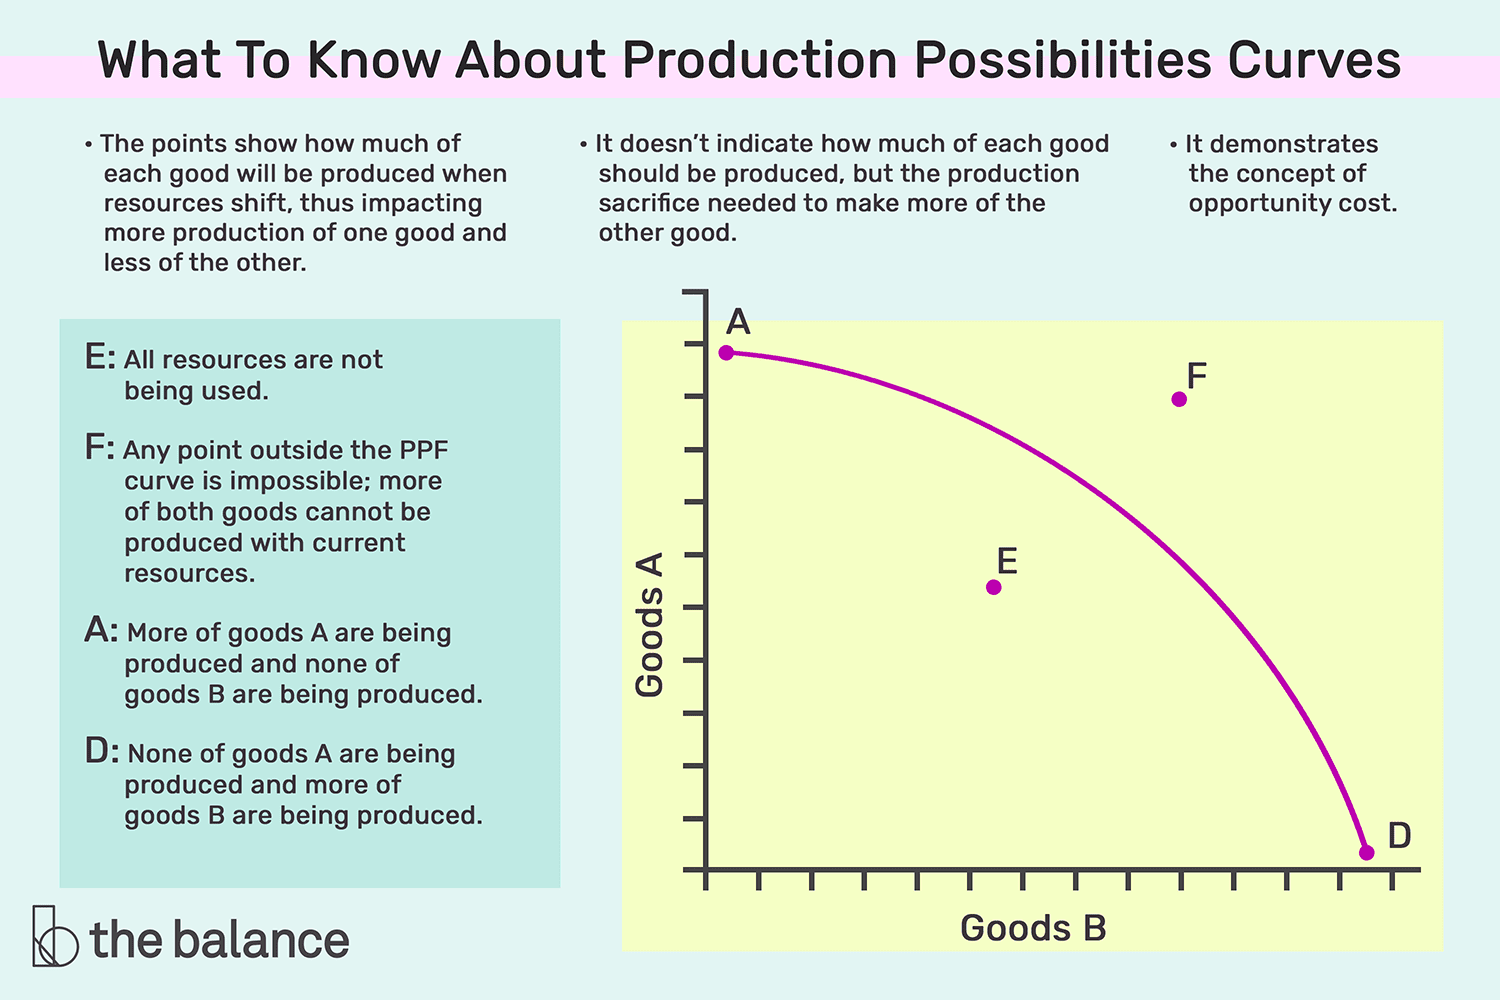 what to know about production possibilities curves. The points show how much of each goods will be produced when resources shift for more production of one good, and less of the other. It demonstrates the concept of opportunity cost. It doesn’t indicate how much of each good should be produced, but the production sacrifice needed to make more of the other good.